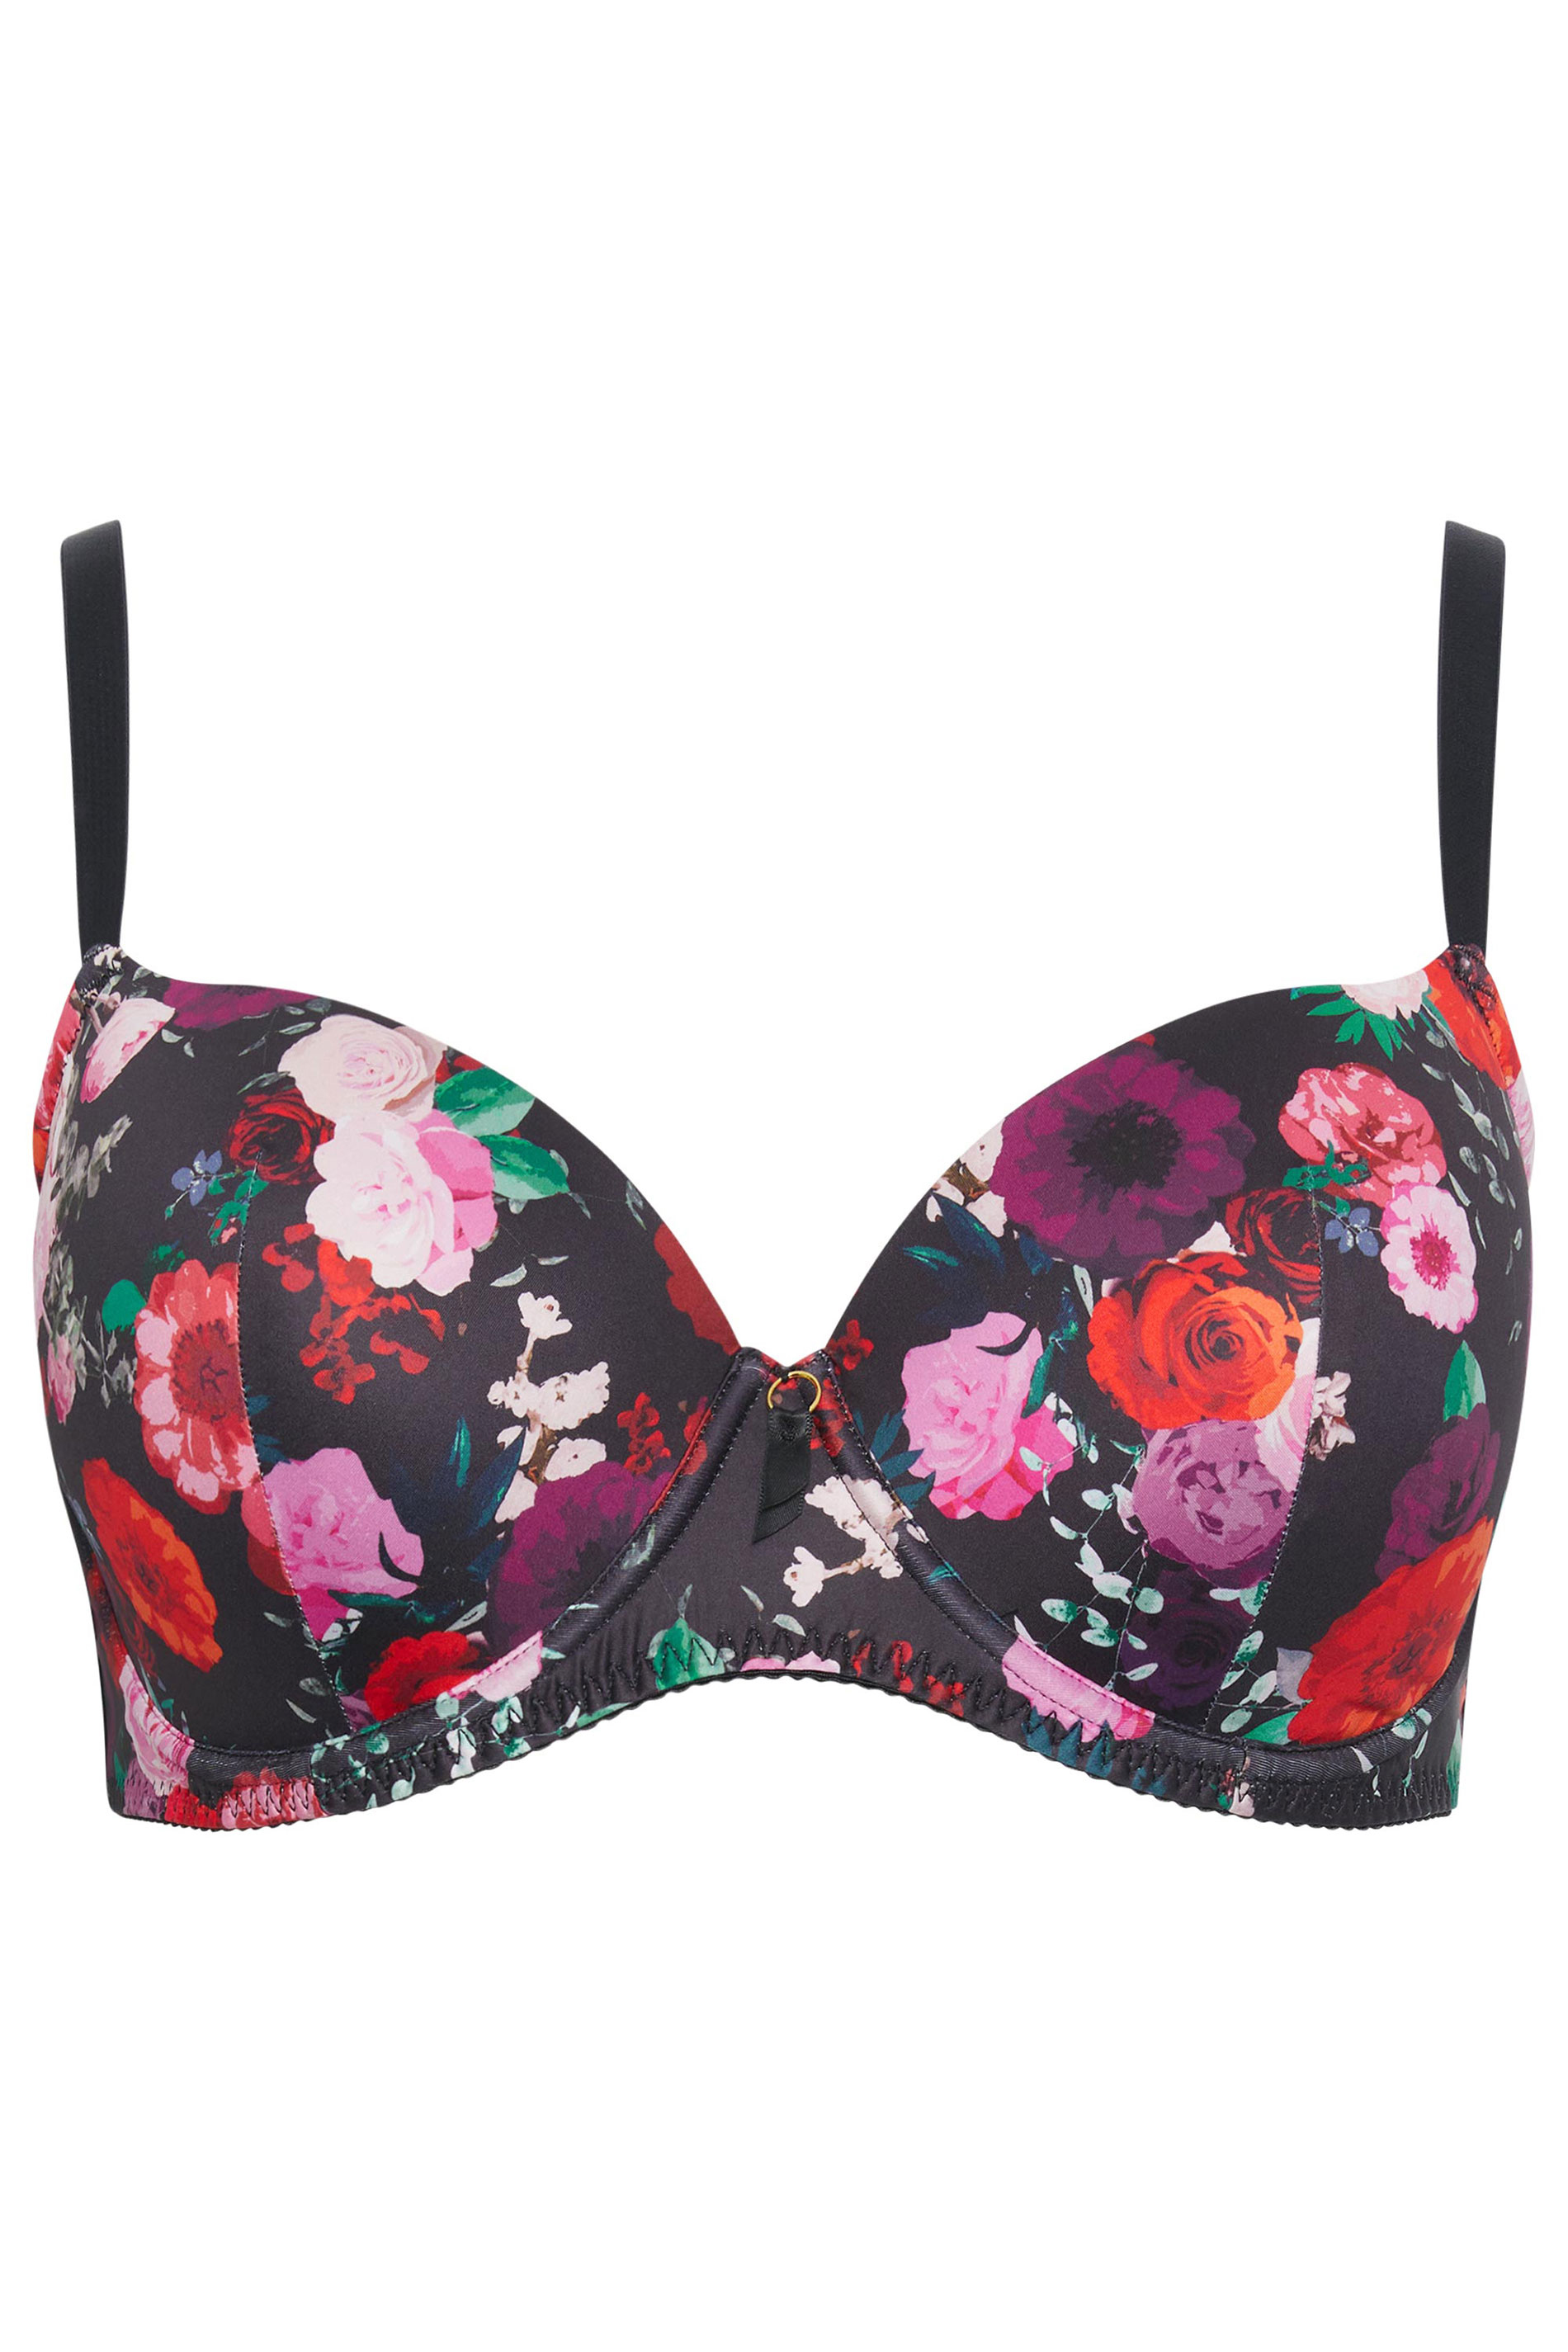 Plus Size 2 PACK Black Floral Print Padded Underwired T-Shirt Bras